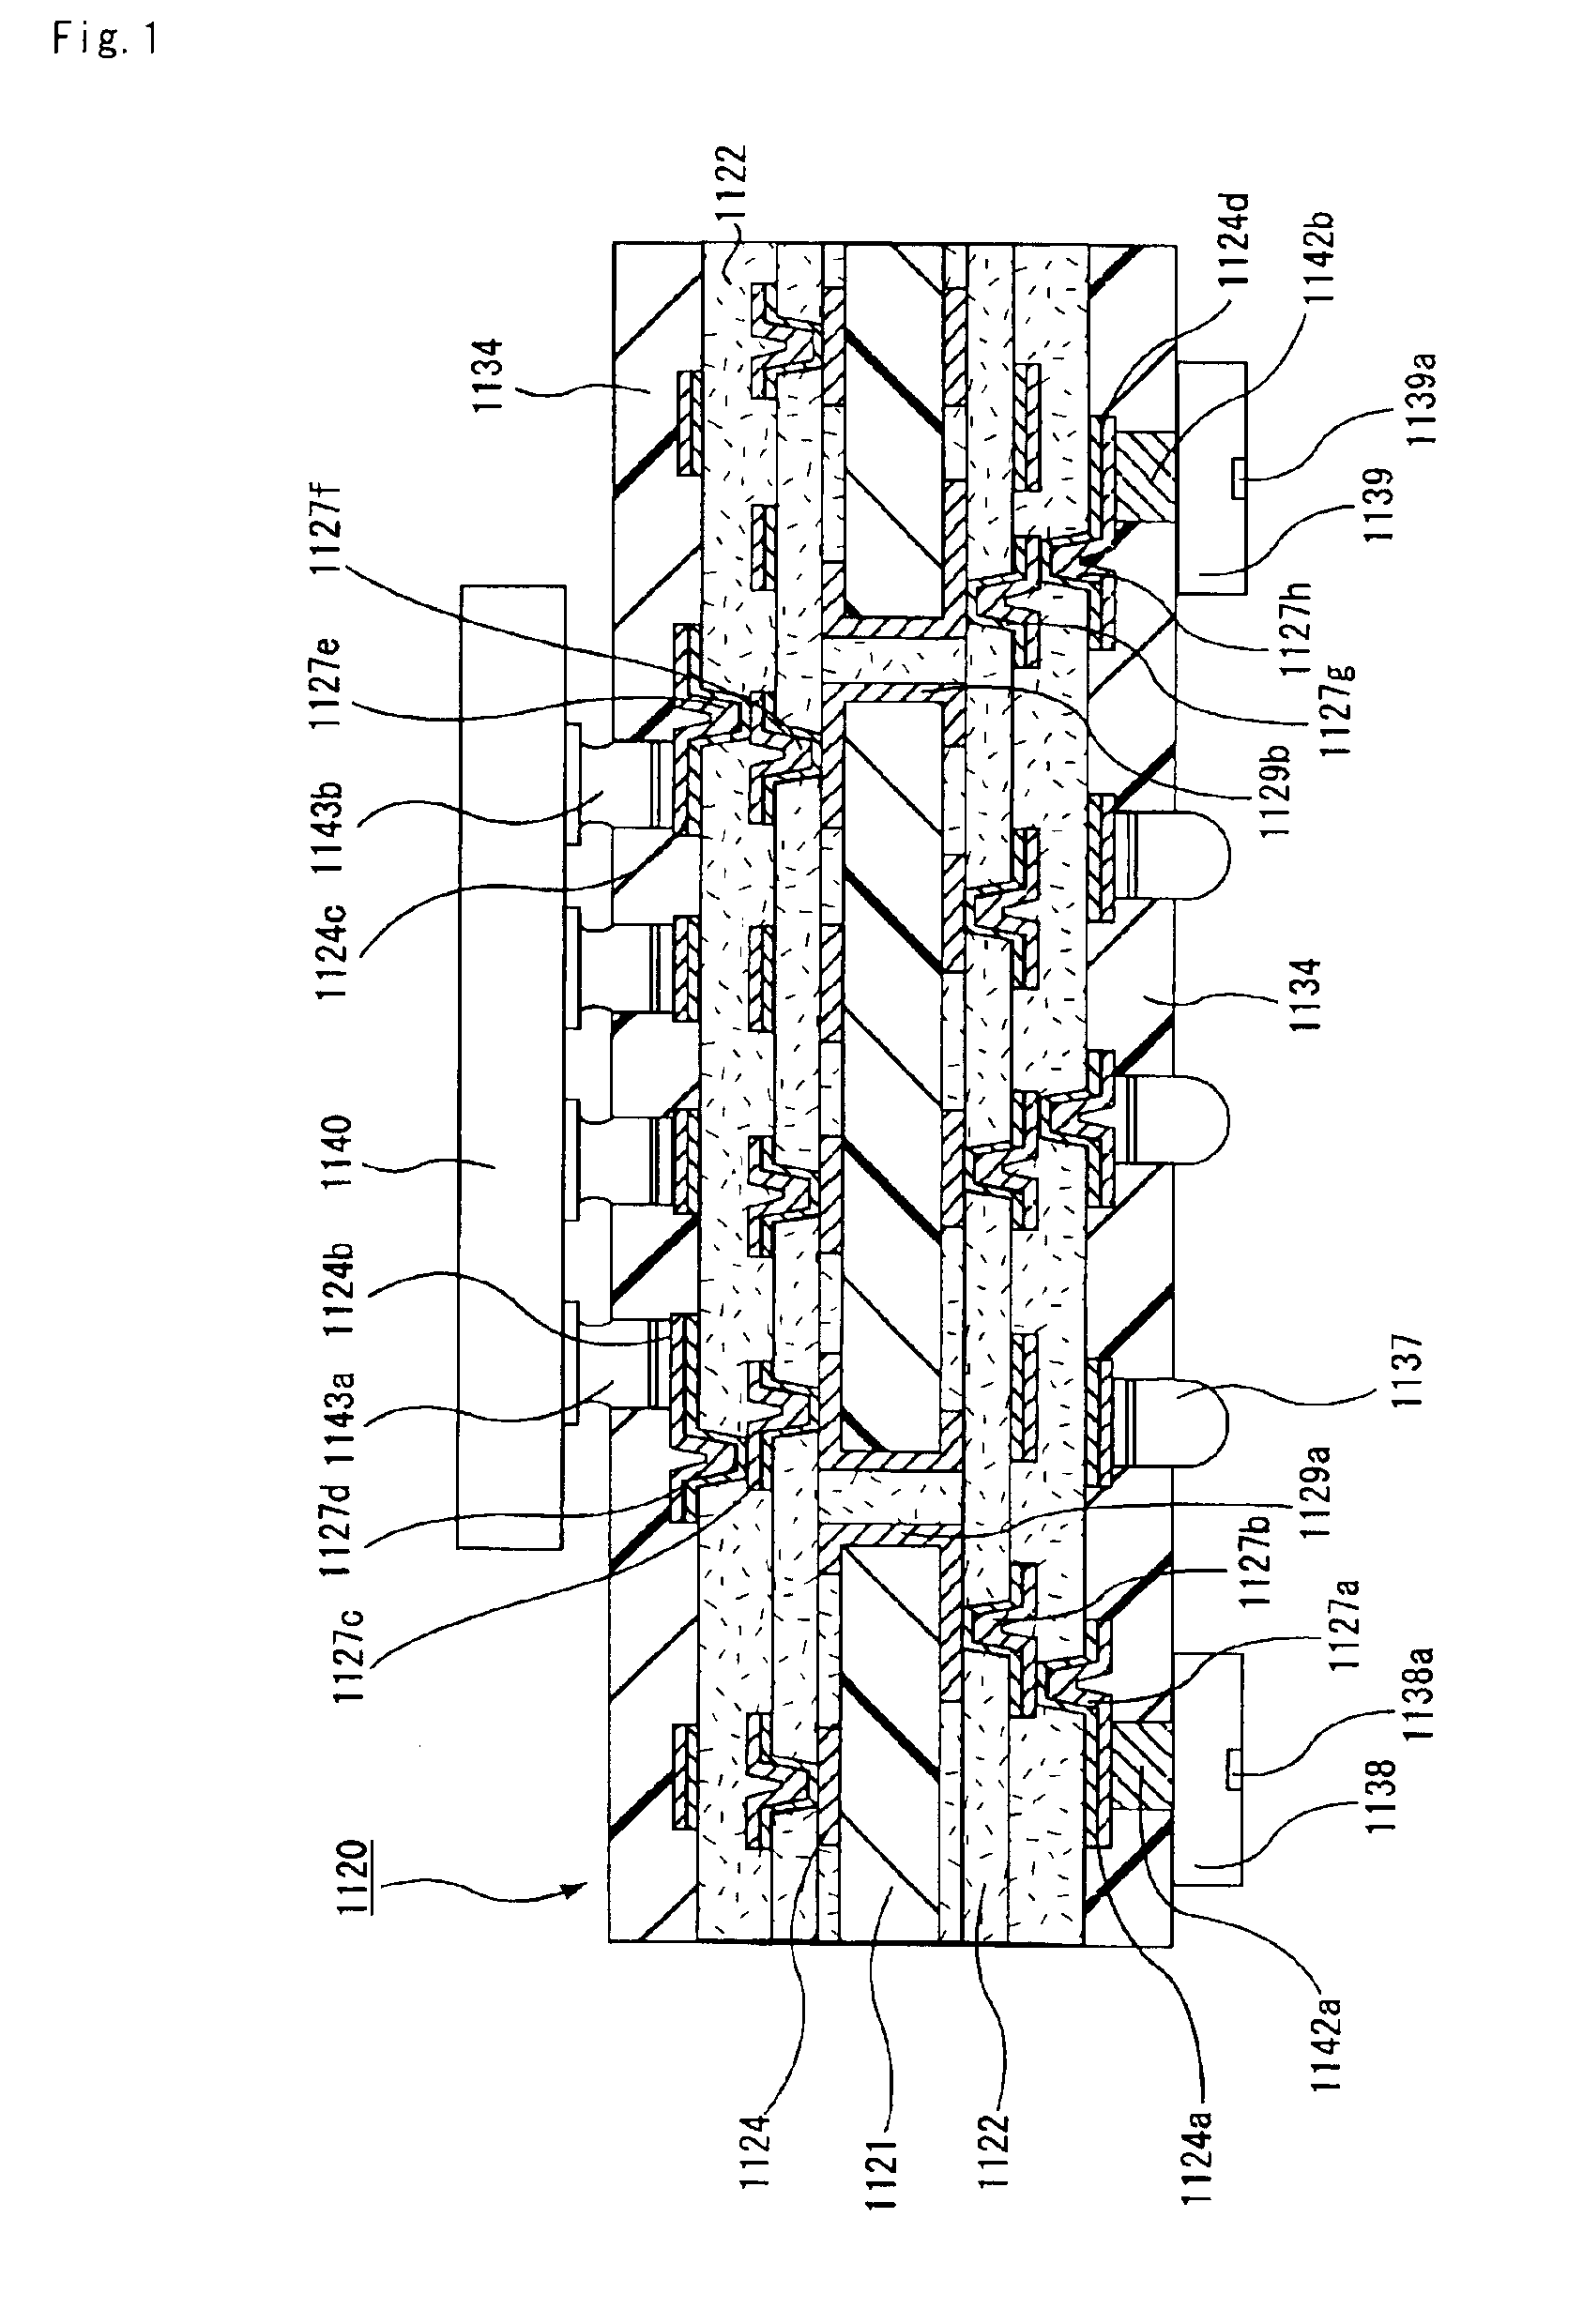 Substrate for mounting IC chip, multilayered printed circuit board, and device for optical communication